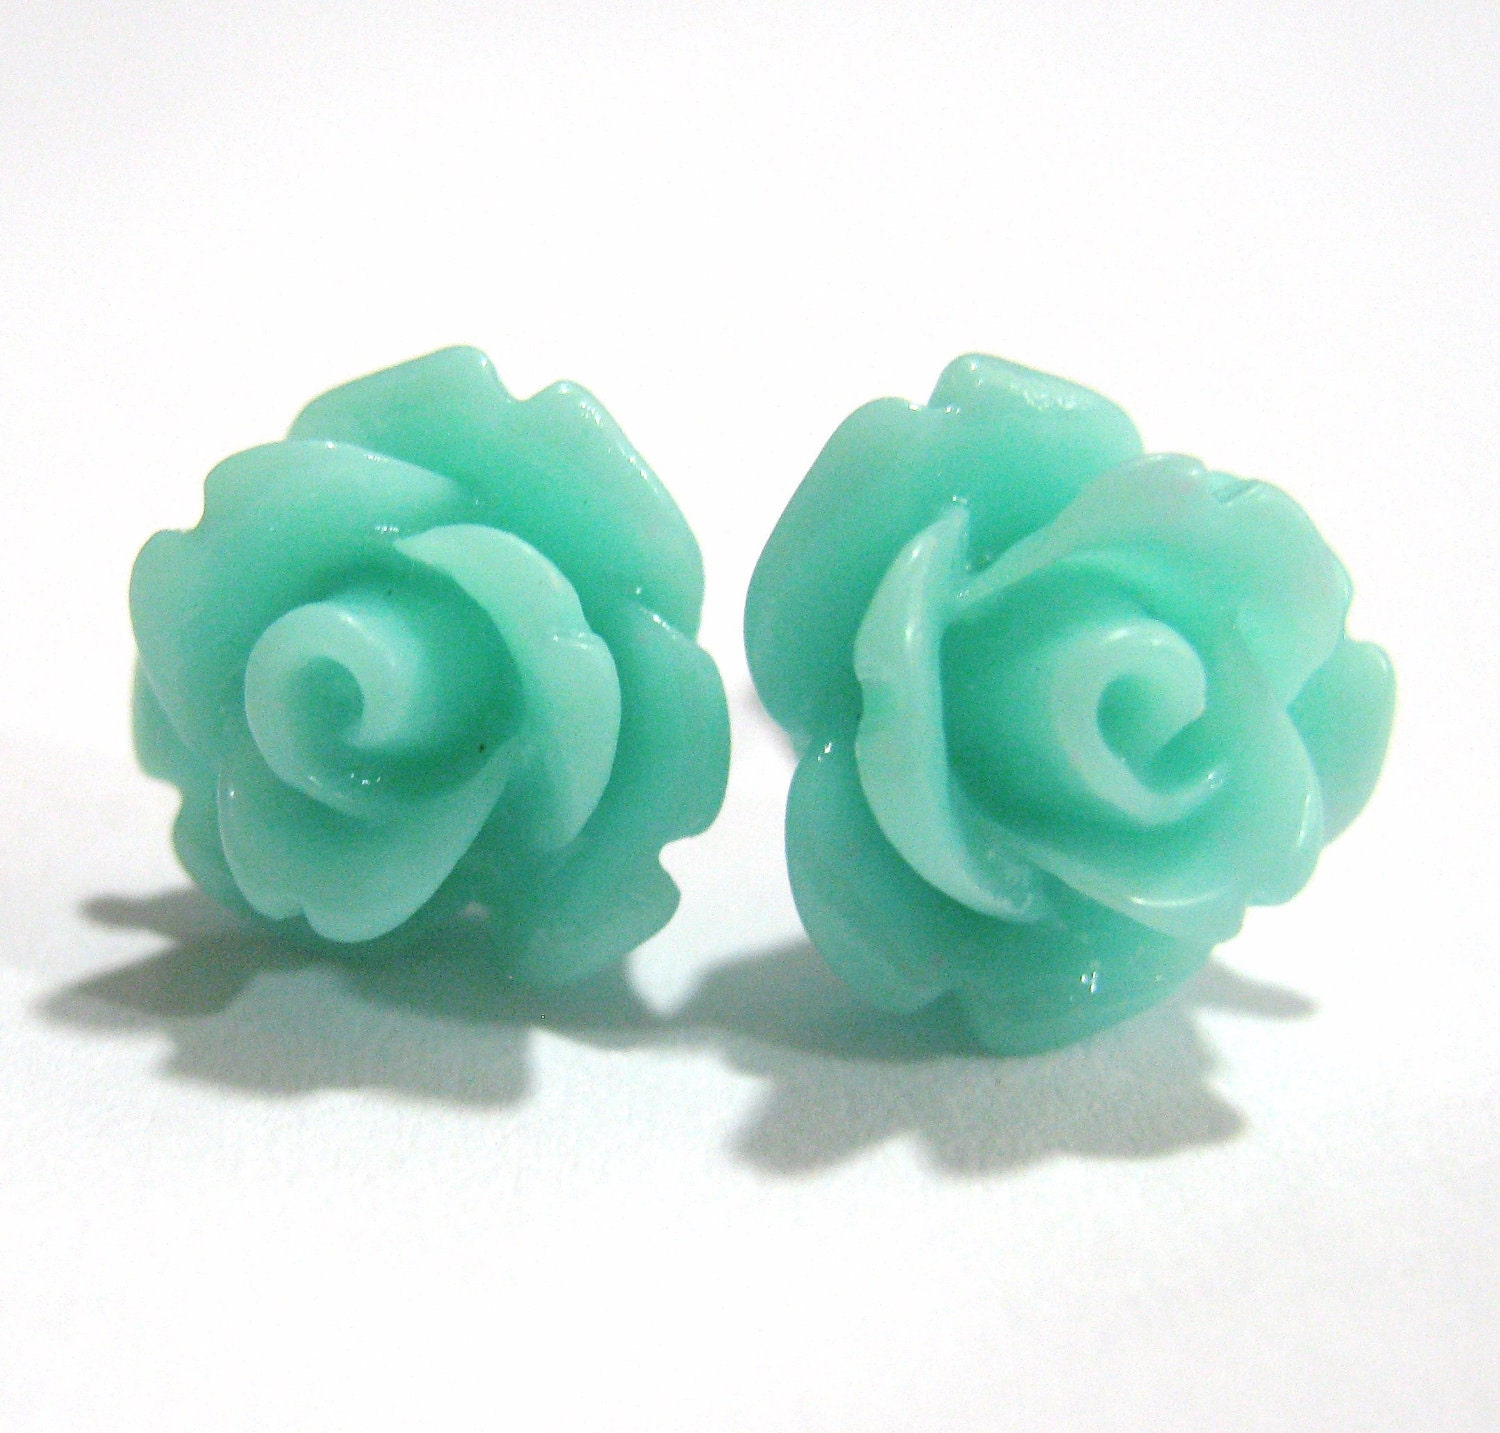 small rose earrings mint by sweetfairyboutique on Etsy